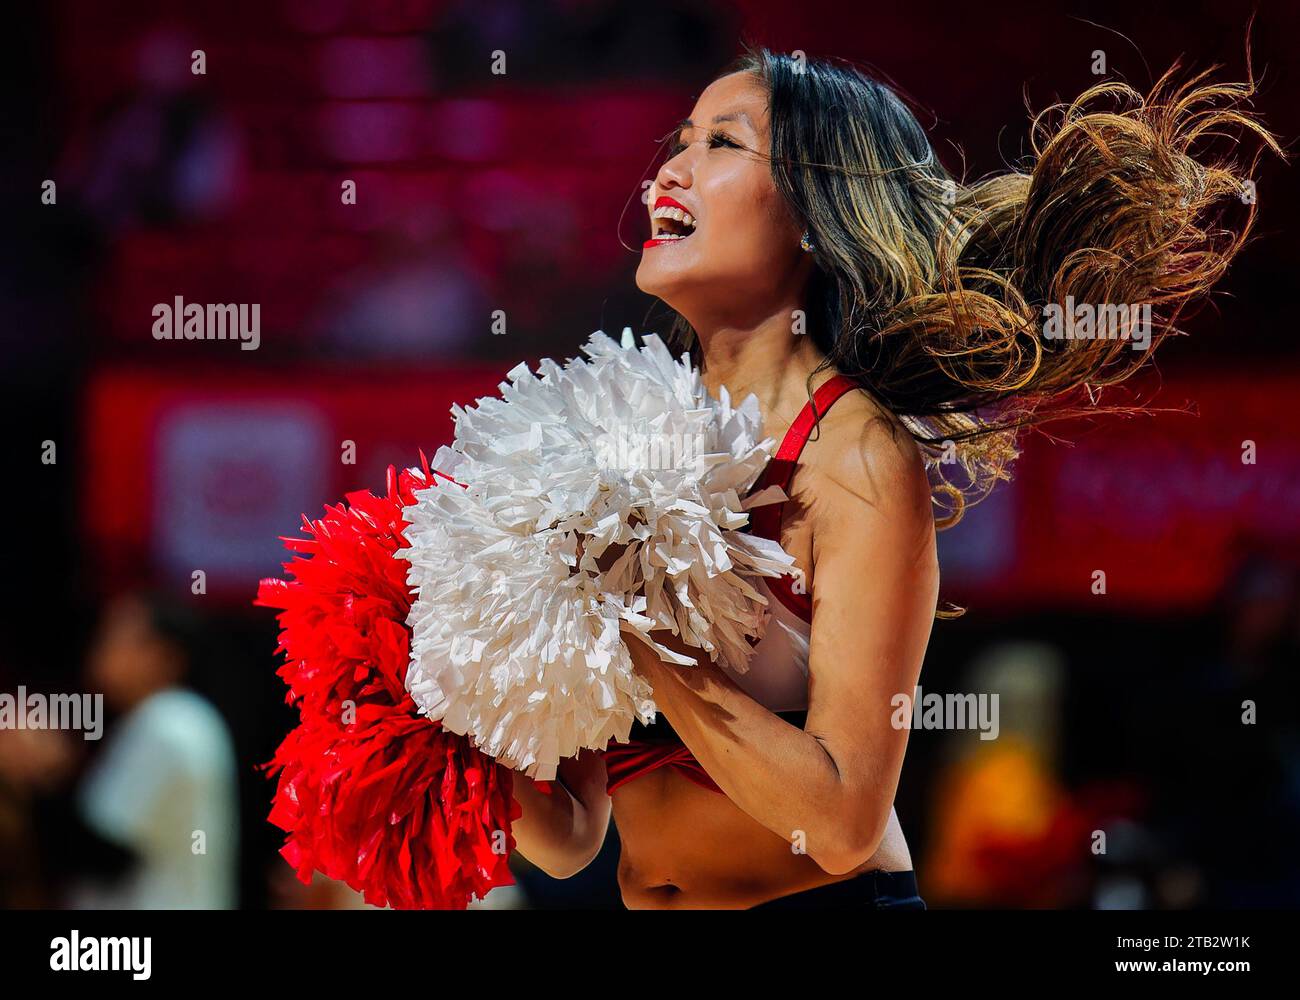 A cheerleader performs at a college basketball game Stock Photo